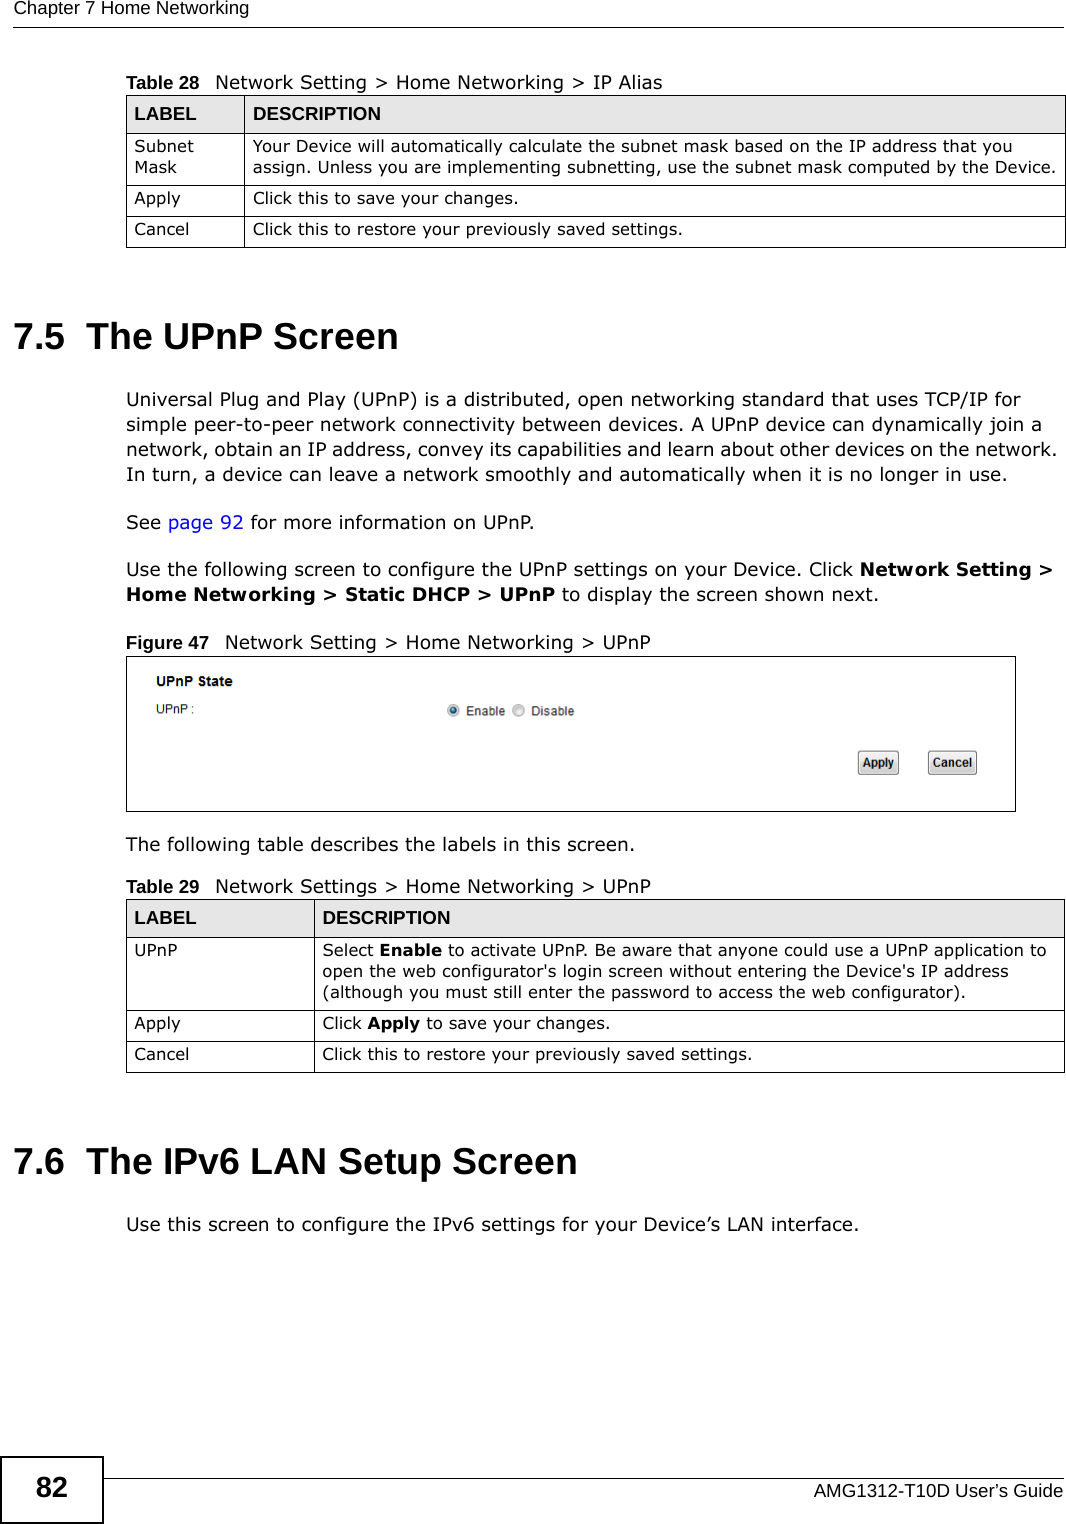 Chapter 7 Home NetworkingAMG1312-T10D User’s Guide827.5  The UPnP ScreenUniversal Plug and Play (UPnP) is a distributed, open networking standard that uses TCP/IP for simple peer-to-peer network connectivity between devices. A UPnP device can dynamically join a network, obtain an IP address, convey its capabilities and learn about other devices on the network. In turn, a device can leave a network smoothly and automatically when it is no longer in use.See page 92 for more information on UPnP.Use the following screen to configure the UPnP settings on your Device. Click Network Setting &gt; Home Networking &gt; Static DHCP &gt; UPnP to display the screen shown next.Figure 47   Network Setting &gt; Home Networking &gt; UPnPThe following table describes the labels in this screen.7.6  The IPv6 LAN Setup ScreenUse this screen to configure the IPv6 settings for your Device’s LAN interface.  Subnet MaskYour Device will automatically calculate the subnet mask based on the IP address that you assign. Unless you are implementing subnetting, use the subnet mask computed by the Device.Apply Click this to save your changes.Cancel Click this to restore your previously saved settings.Table 28   Network Setting &gt; Home Networking &gt; IP Alias LABEL DESCRIPTIONTable 29   Network Settings &gt; Home Networking &gt; UPnPLABEL DESCRIPTIONUPnP Select Enable to activate UPnP. Be aware that anyone could use a UPnP application to open the web configurator&apos;s login screen without entering the Device&apos;s IP address (although you must still enter the password to access the web configurator).Apply Click Apply to save your changes.Cancel Click this to restore your previously saved settings.